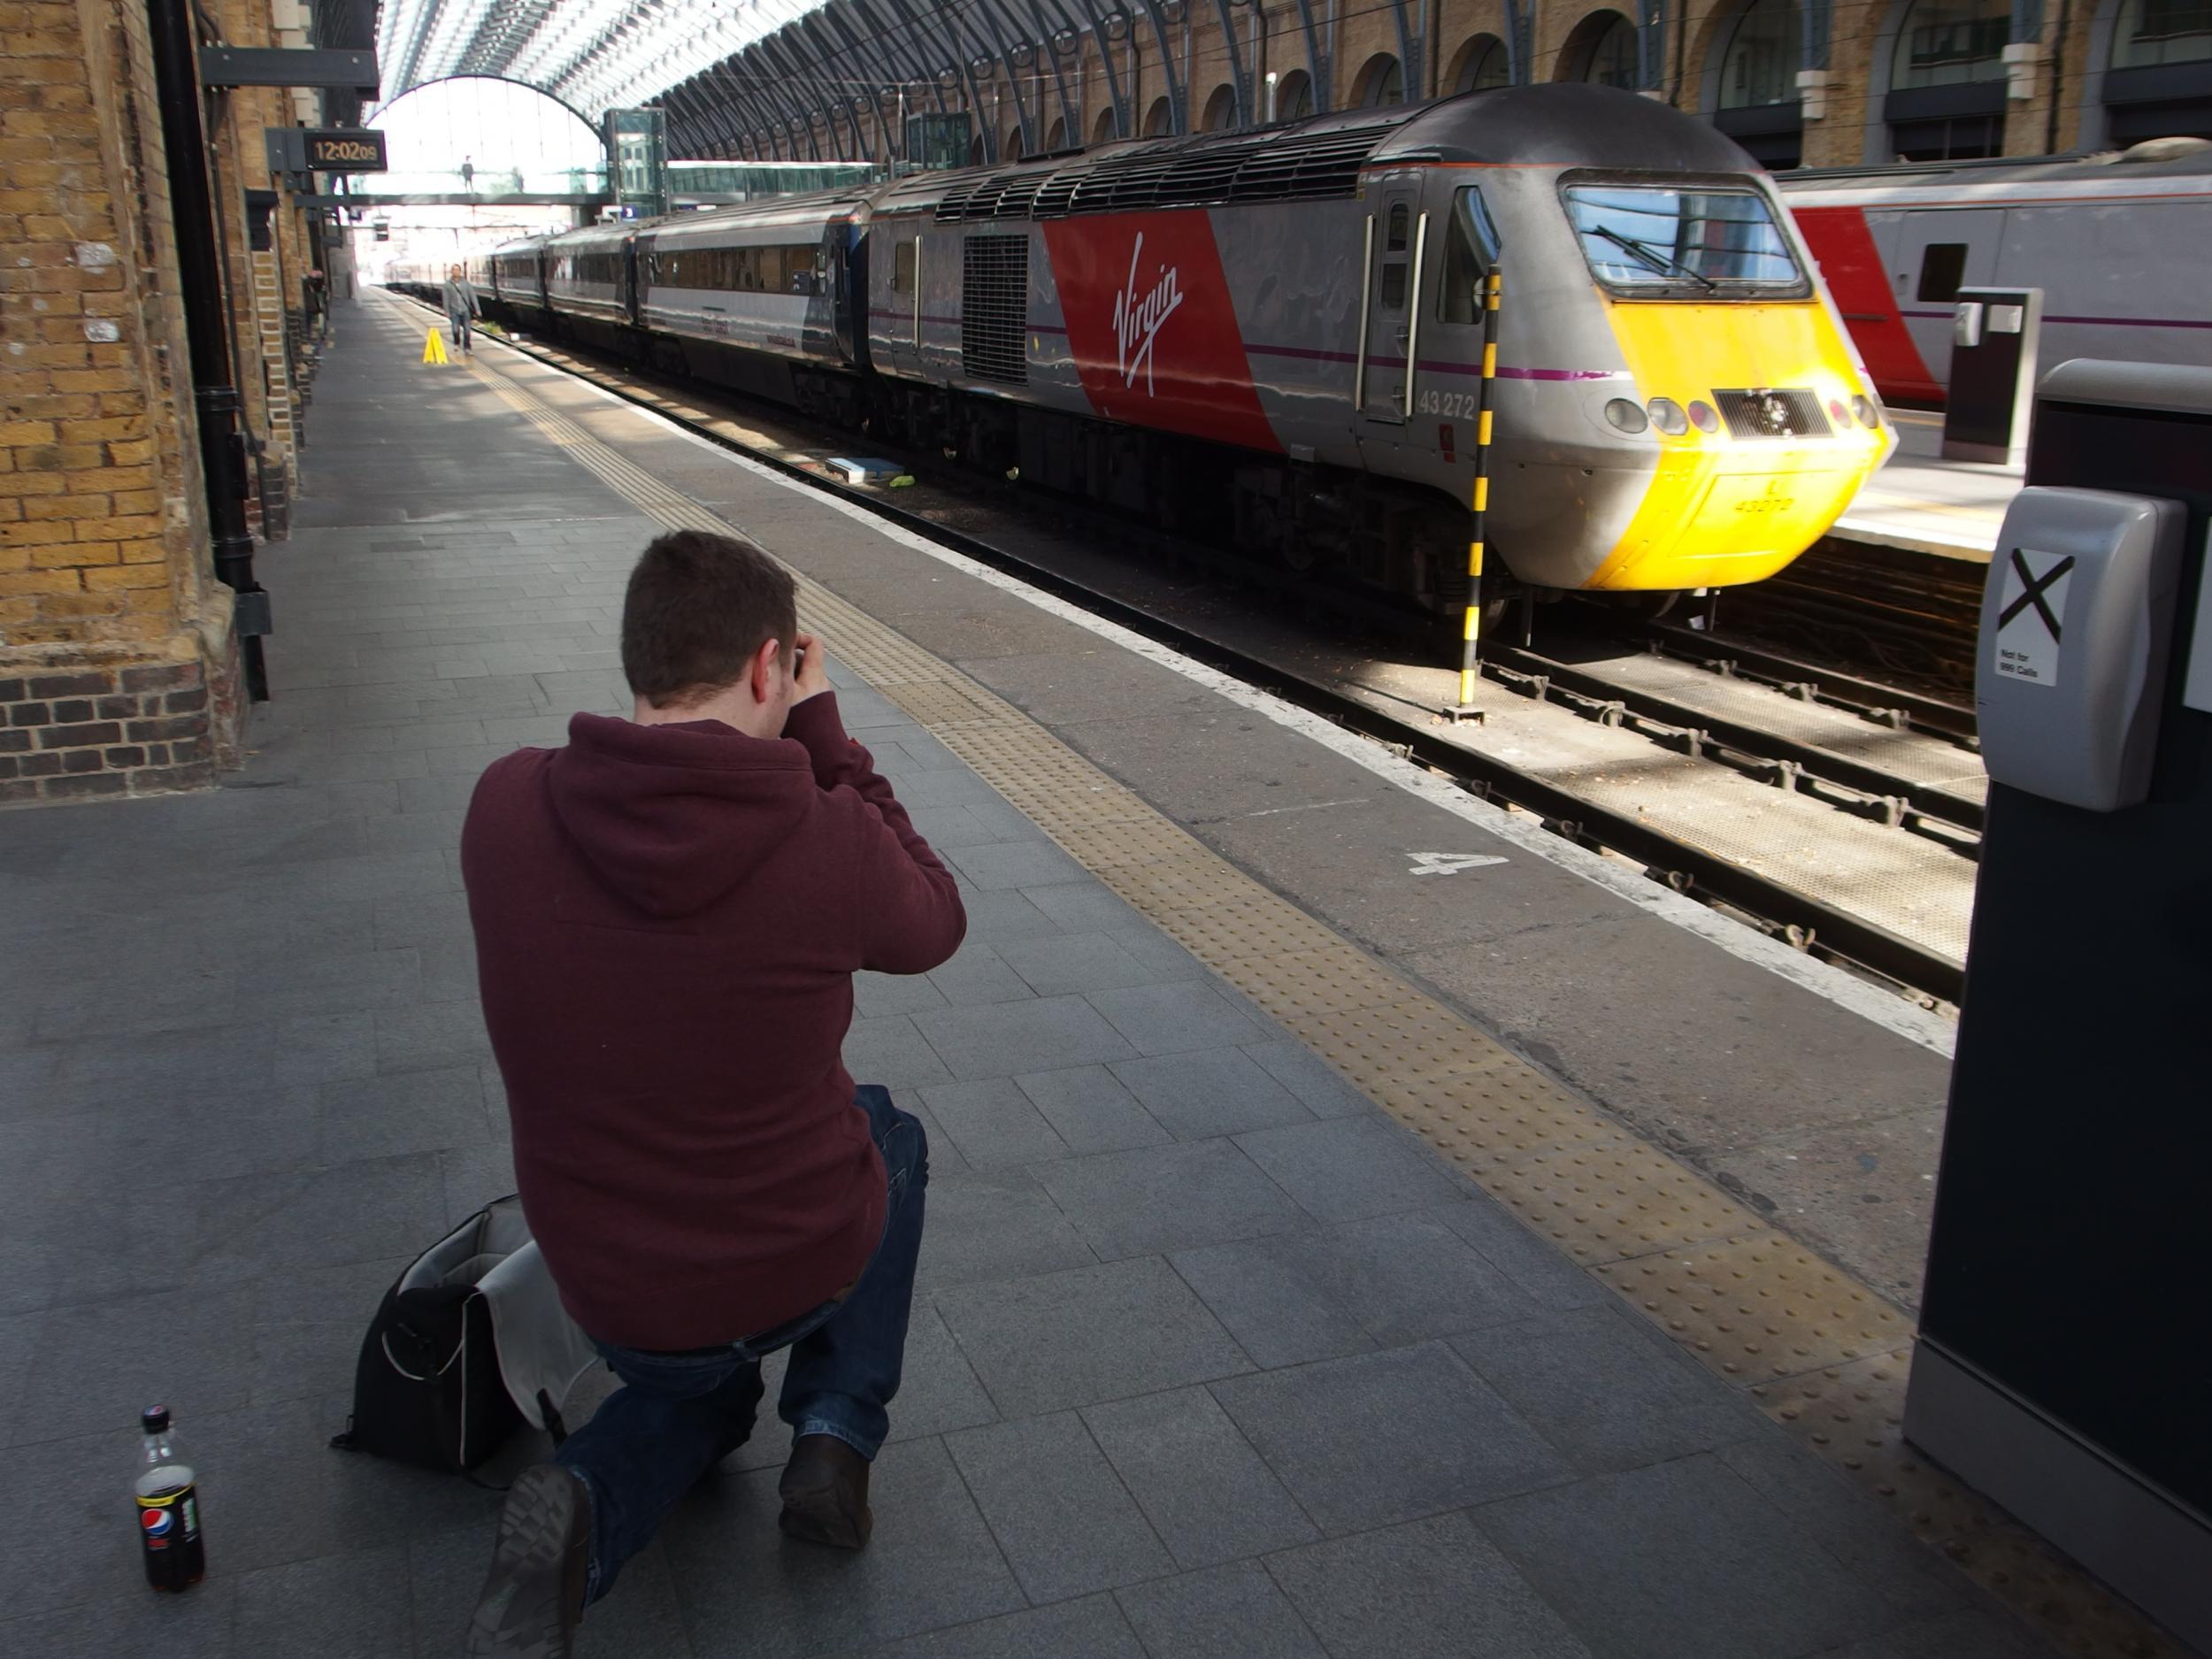 Better days: the first Virgin Trains East Coast arrival at London King's Cross, on 1 March 2015